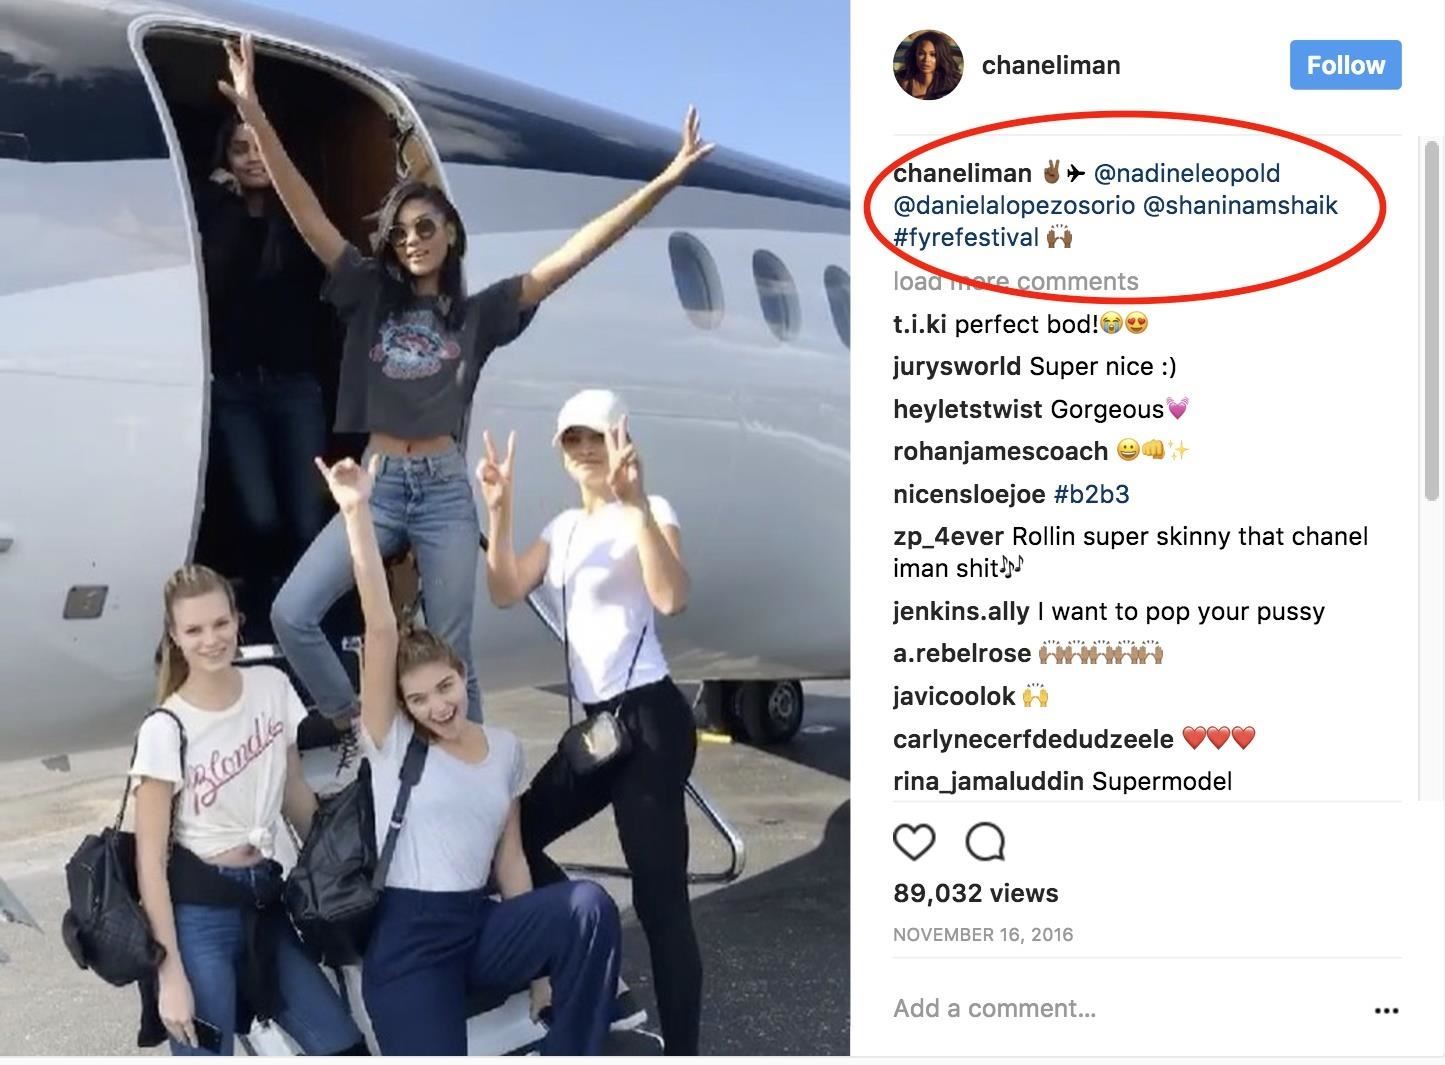 Fyre Starters: Meet the 15 Stars Whose (Undisclosed) #Spon Brought the FTC's Wrath on Instagram